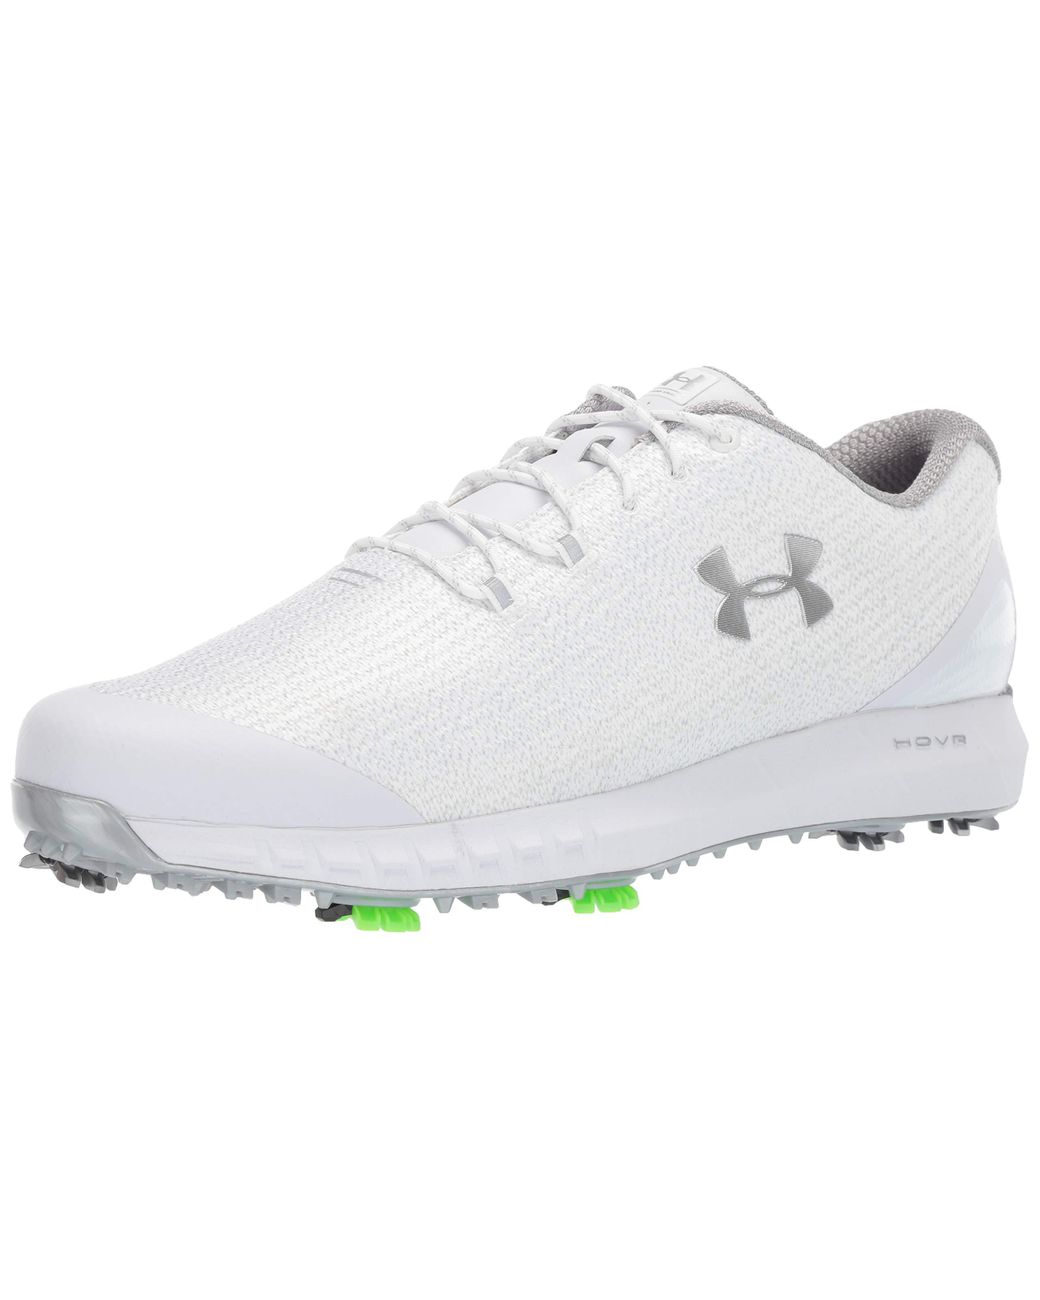 under armour men's hovr drive golf shoes